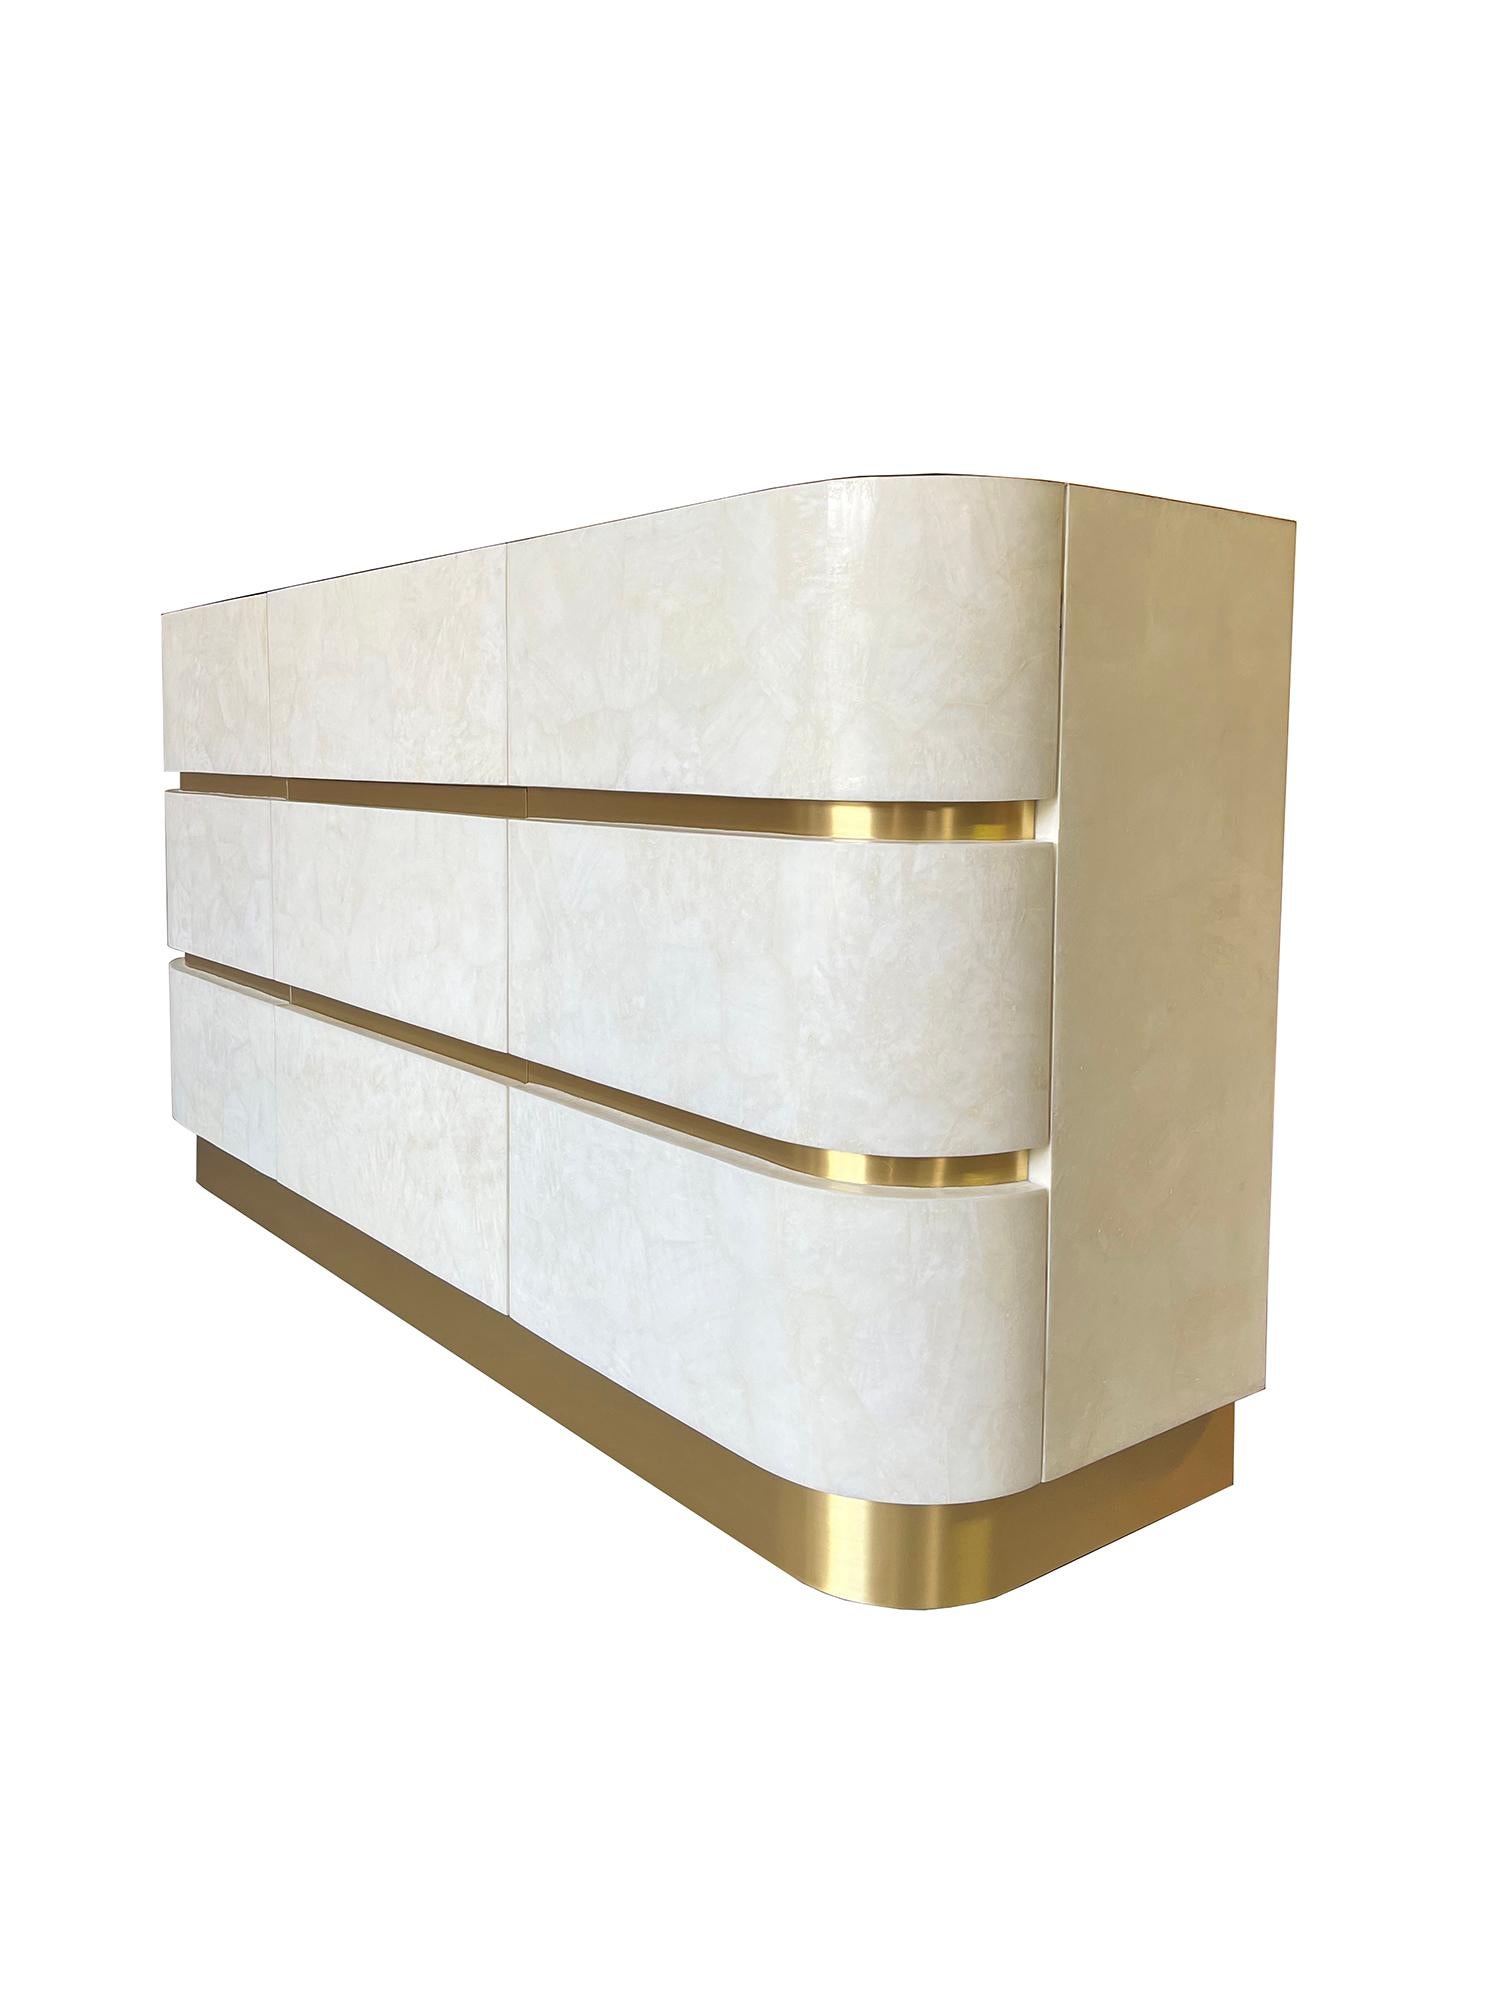 This cabinet has 2 doors and three drawers in the center, and it is made of white rock crystal marquetry with brass trims.
The base is in brushed brass.

The interior is in light oak veneer.
 
The dimensions of this piece are 66.9